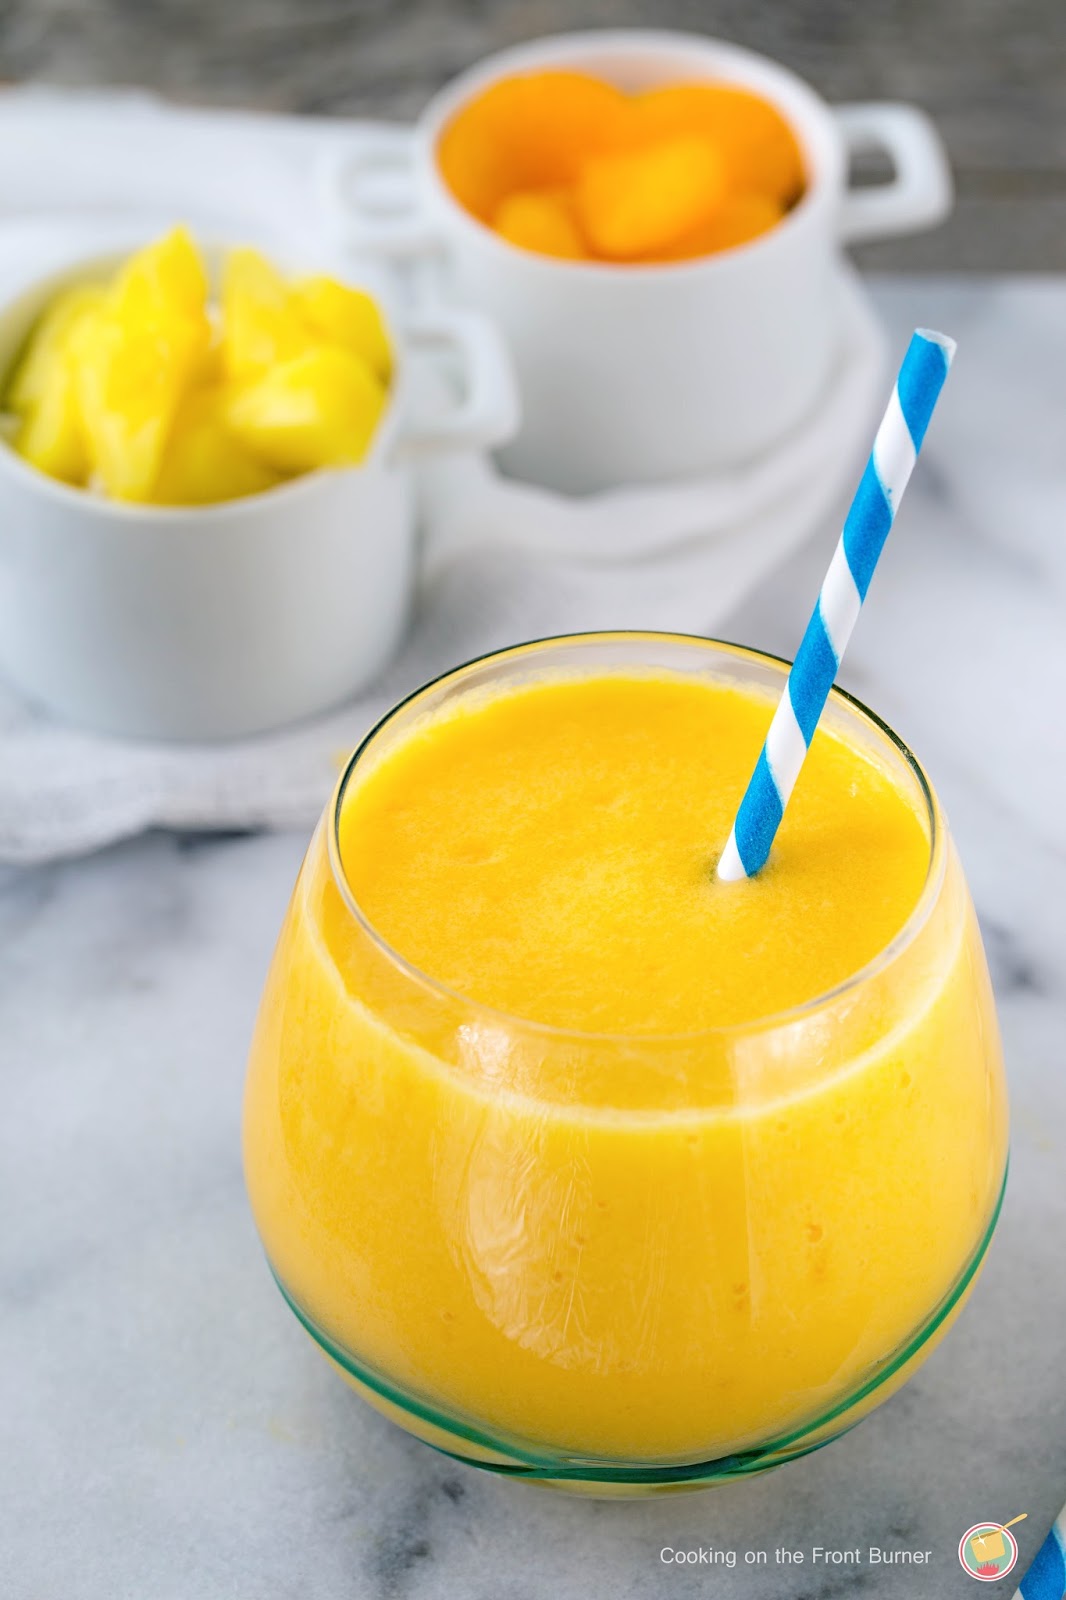 Pineapple Orange Smoothie | Cooking on the Front Burner